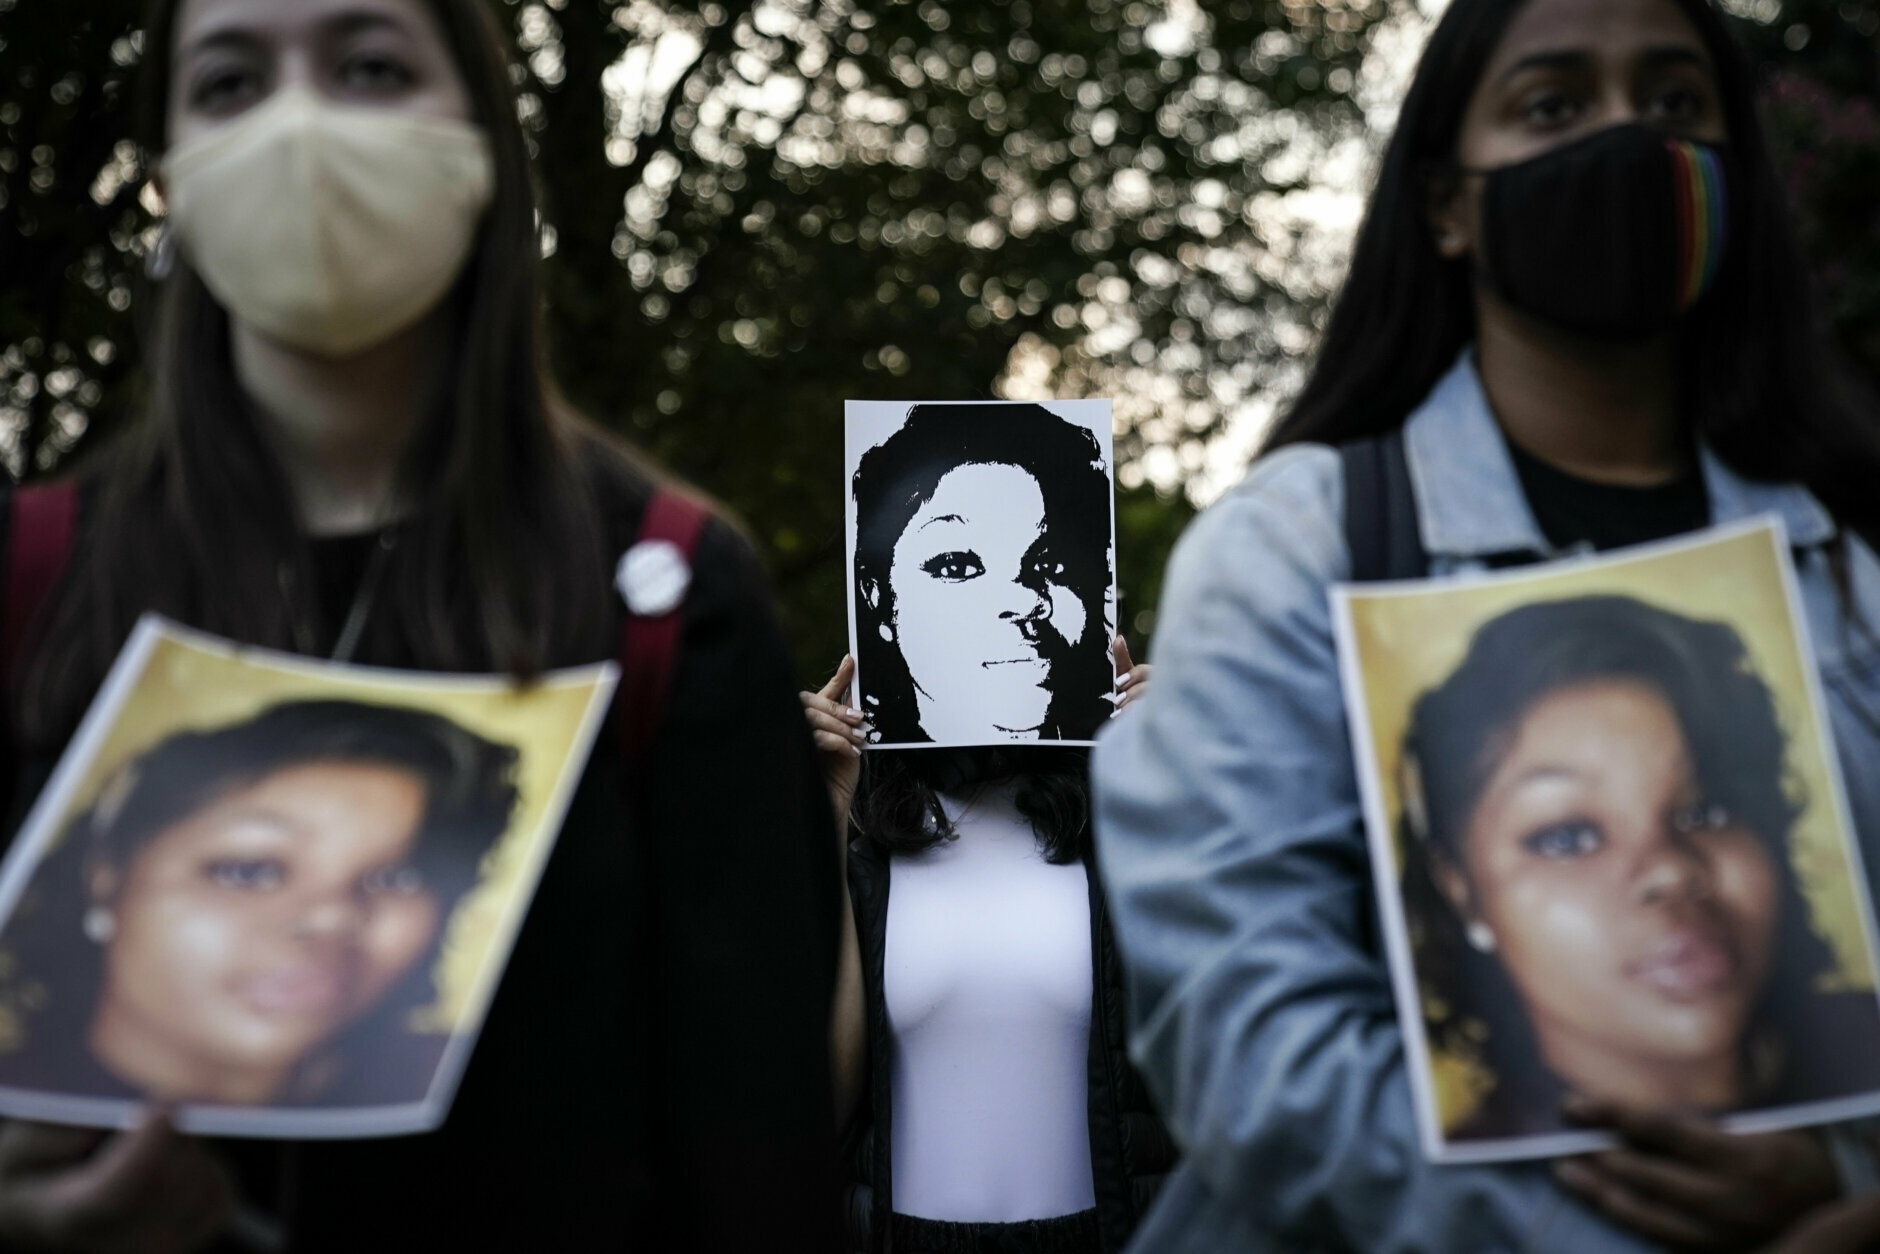 WASHINGTON, DC - SEPTEMBER 23: Demonstrators hold up images of Breonna Taylor as they rally in front of the U.S. Department of Justice in protest following a Kentucky grand jury decision in the Breonna Taylor case on September 23, 2020 in Washington, DC. A Kentucky grand jury indicted one police officer involved in the shooting of Breonna Taylor with 3 counts of wanton endangerment. No officers were indicted on charges in connection to Taylor's death. (Photo by Drew Angerer/Getty Images)